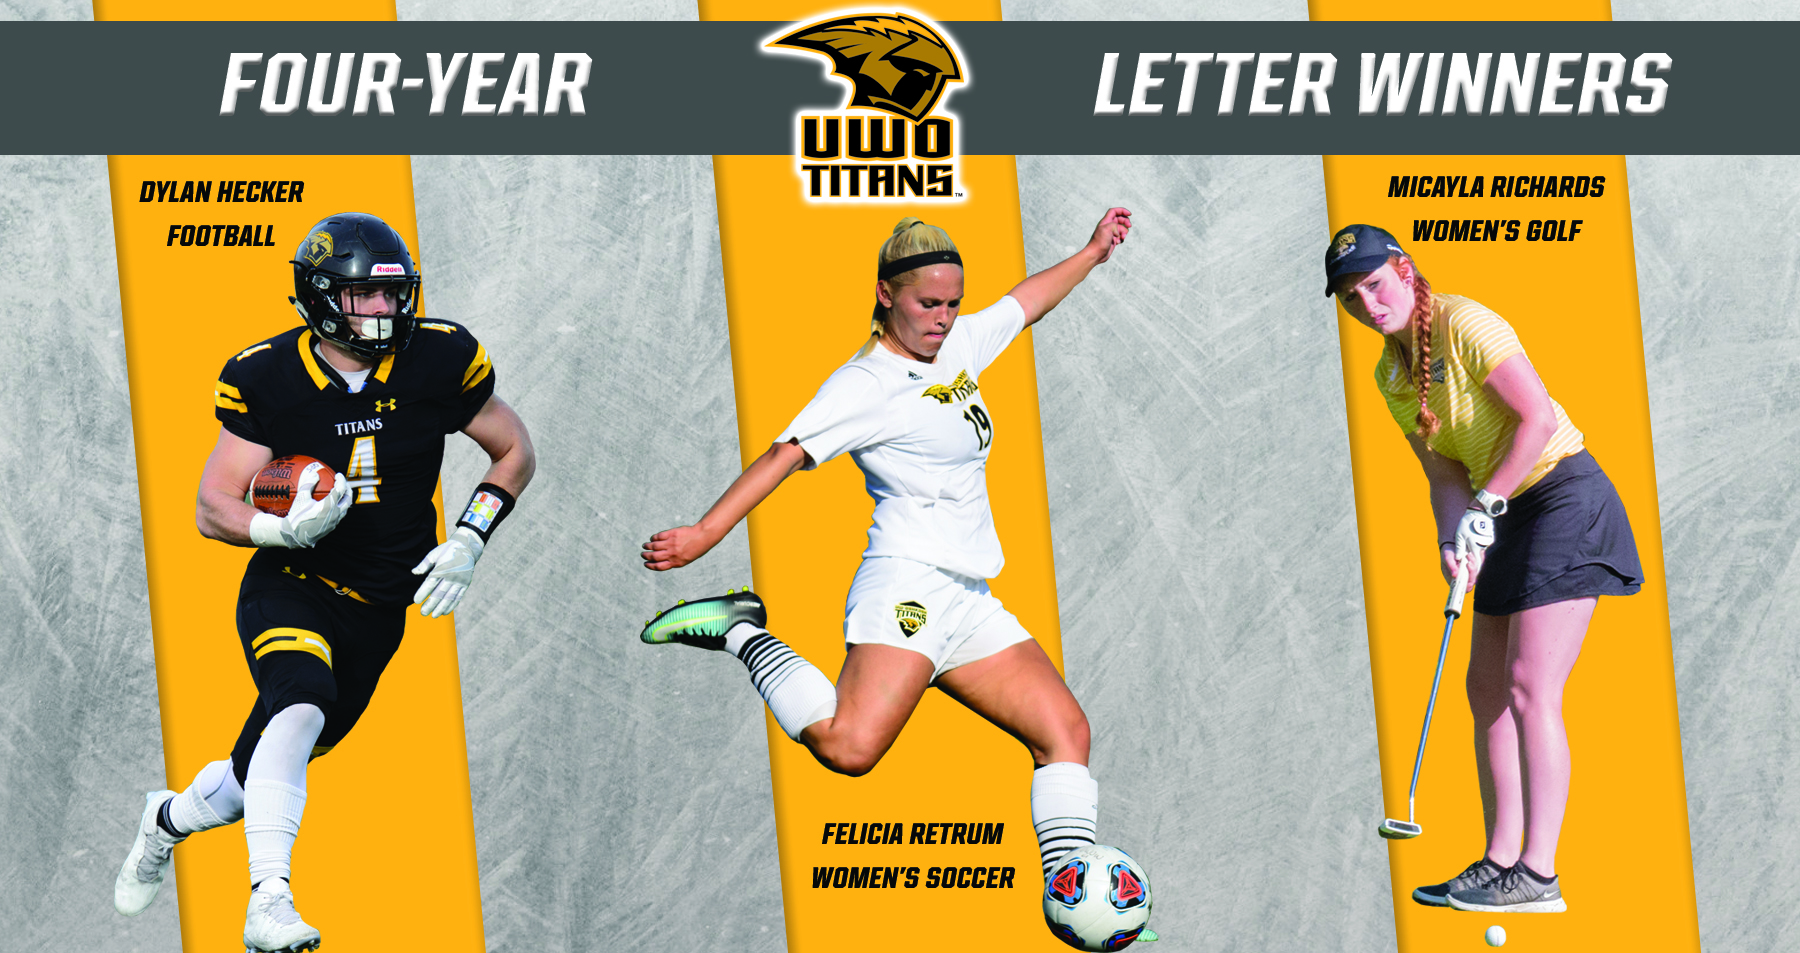 50 Titans Become Four-Year Letter Winner